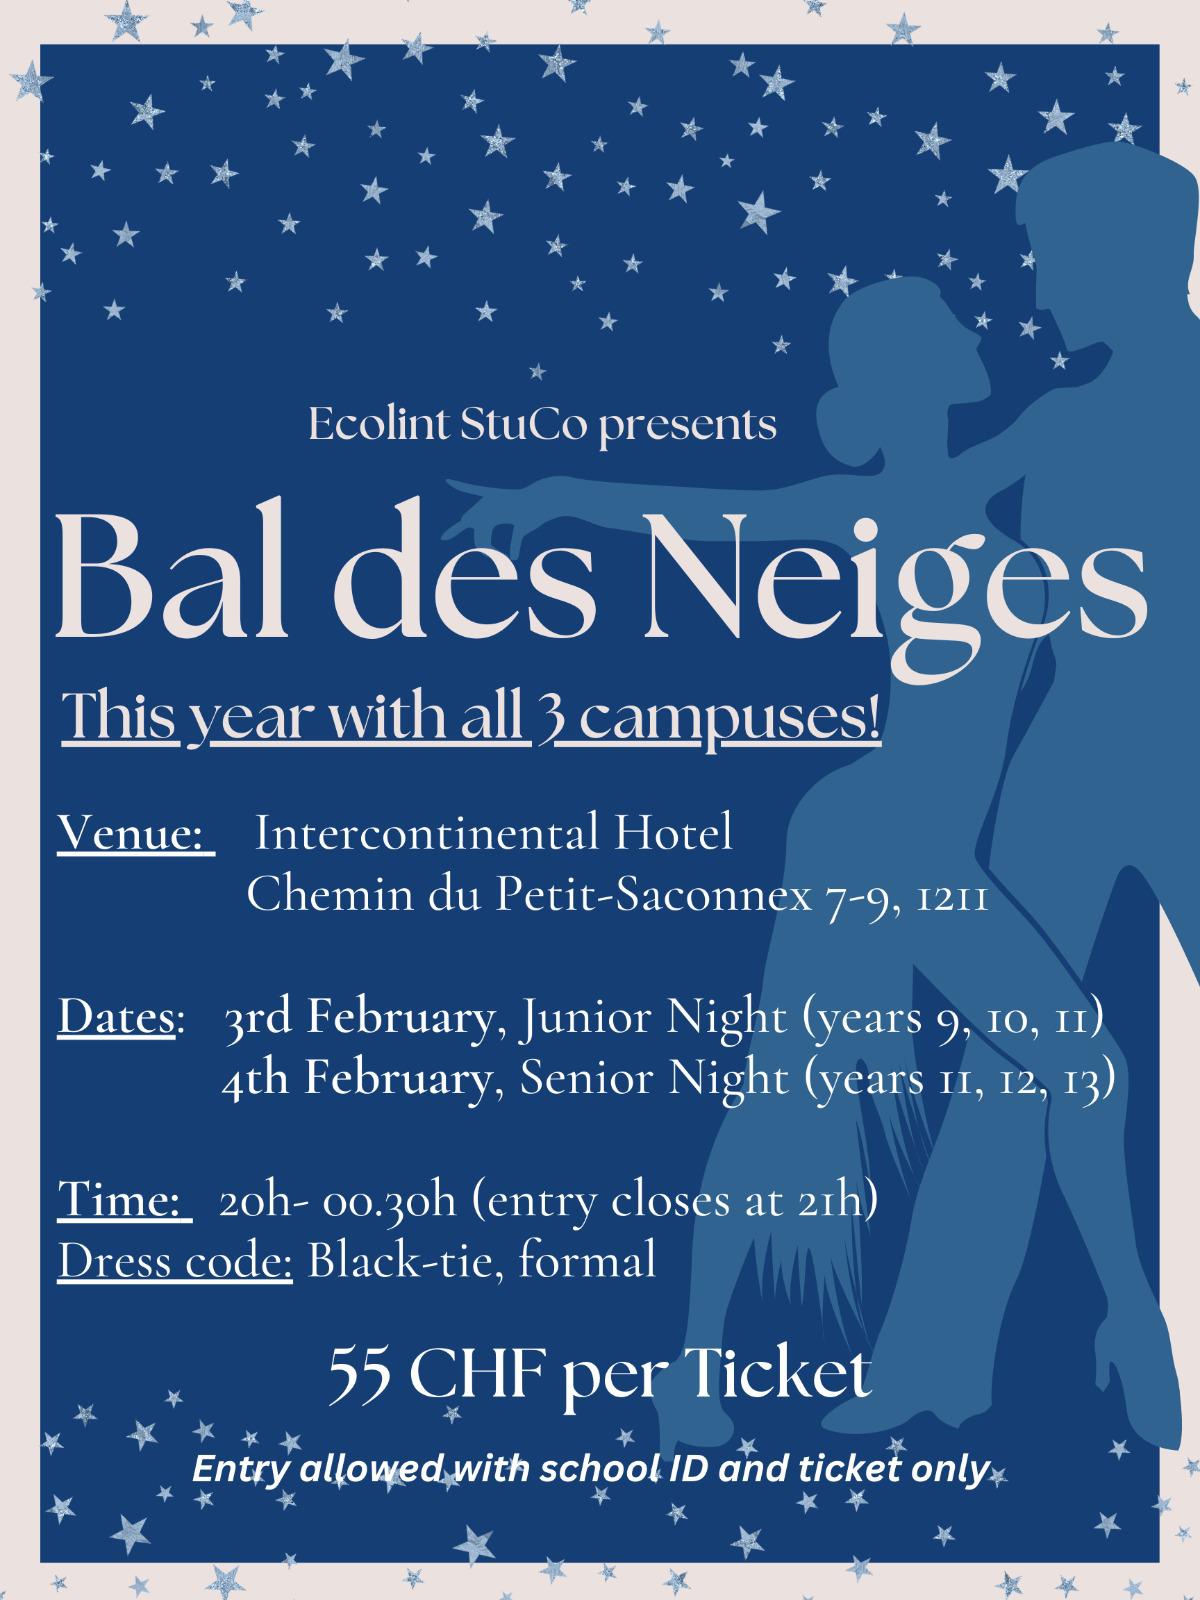 The Grand Return of The Bal des Neiges